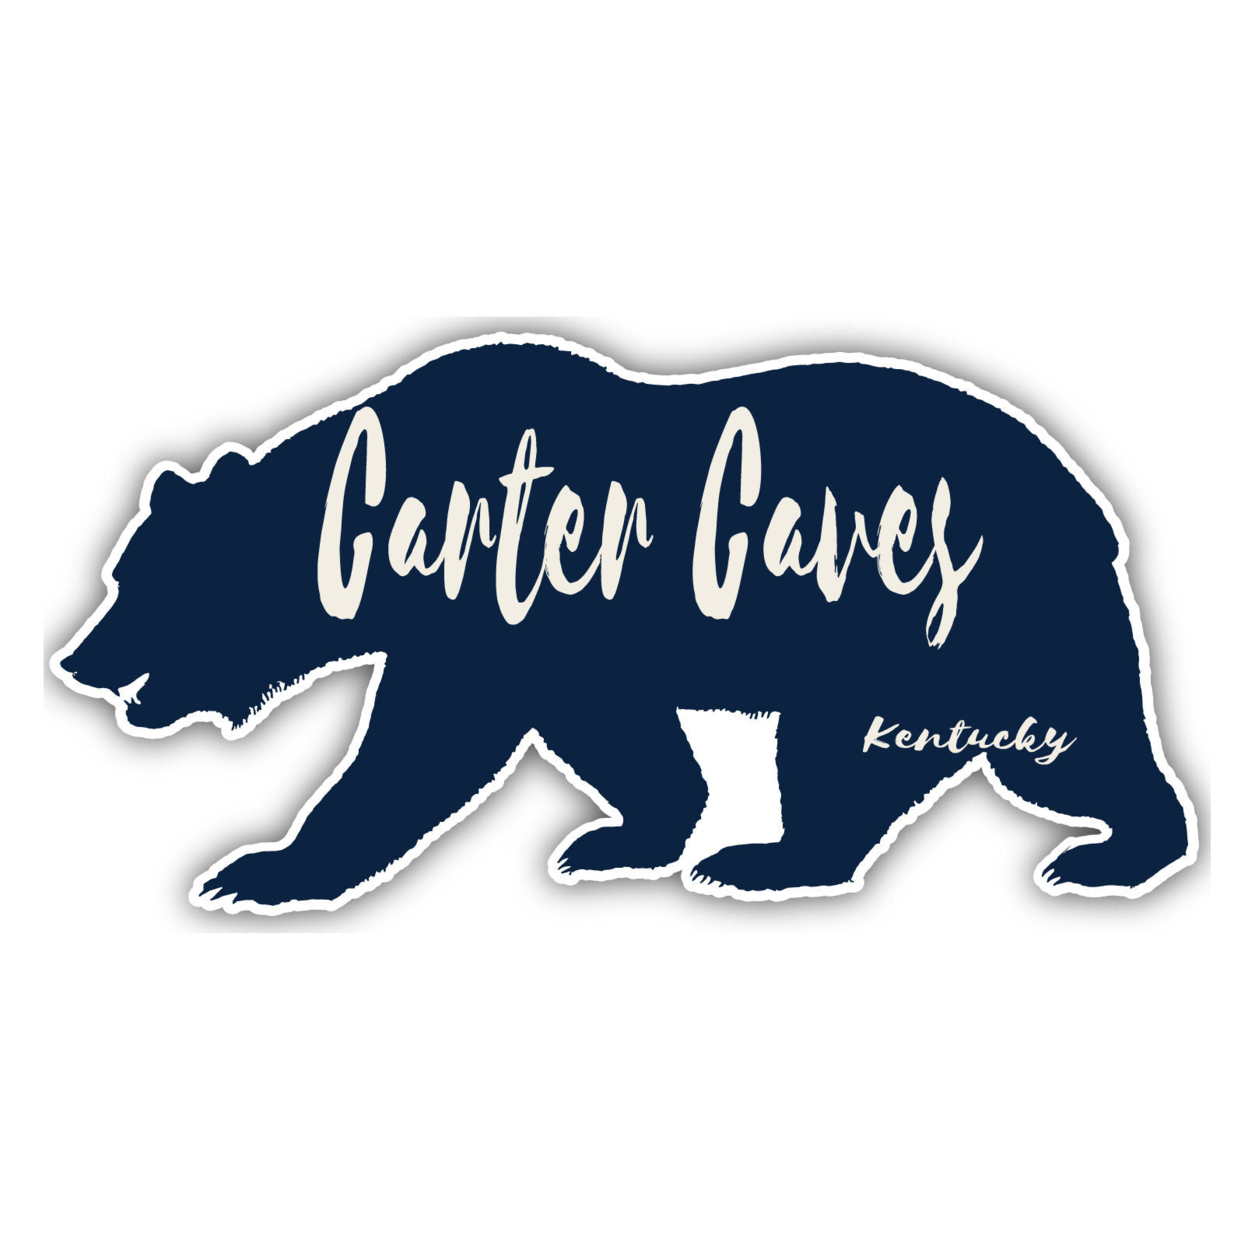 Carter Caves Kentucky Souvenir Decorative Stickers (Choose Theme And Size) - 4-Pack, 2-Inch, Bear